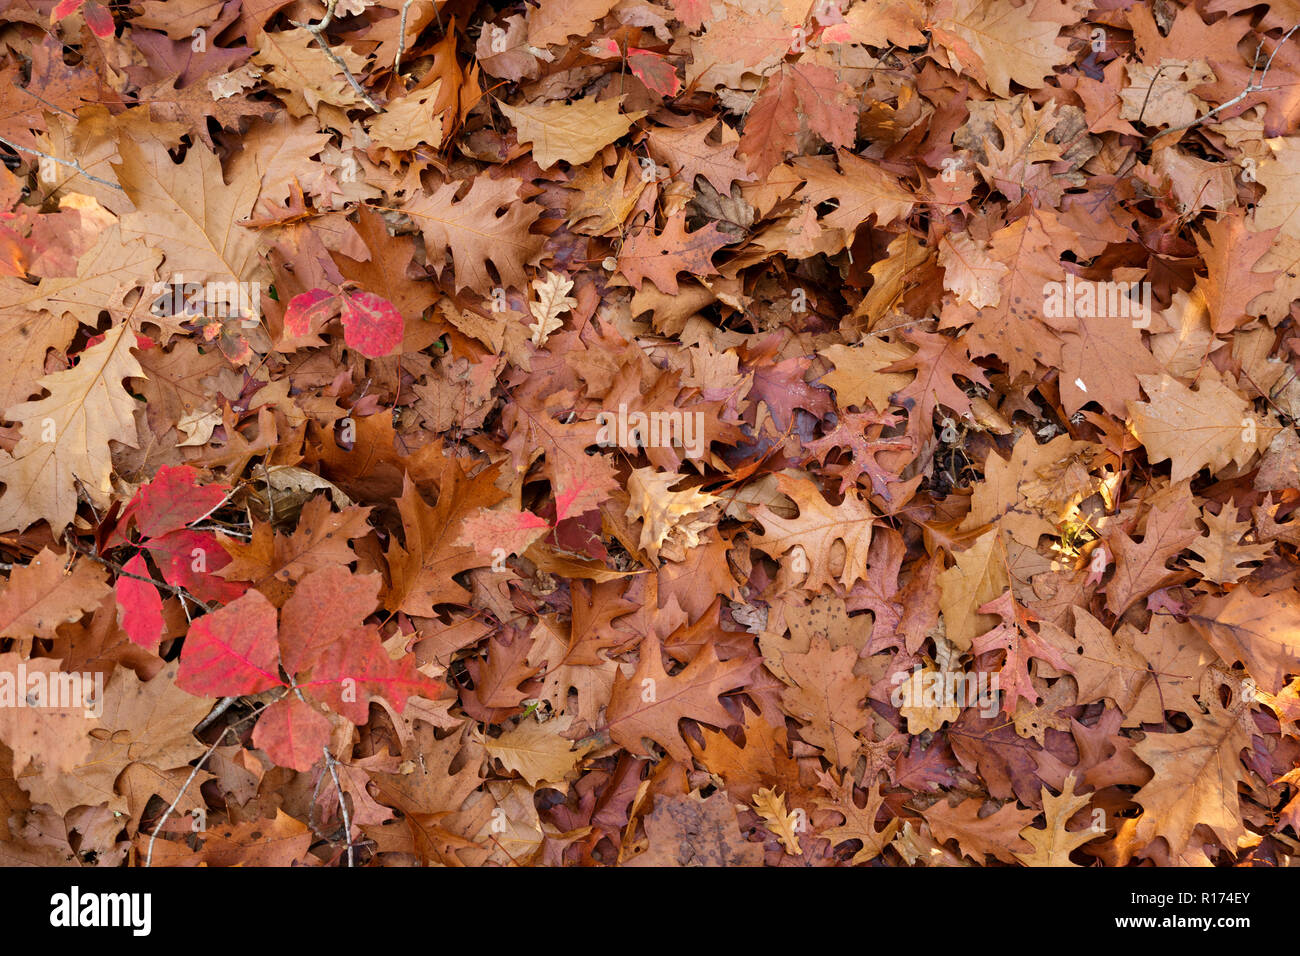 Fallen leaves background in a temperate forest Stock Photo